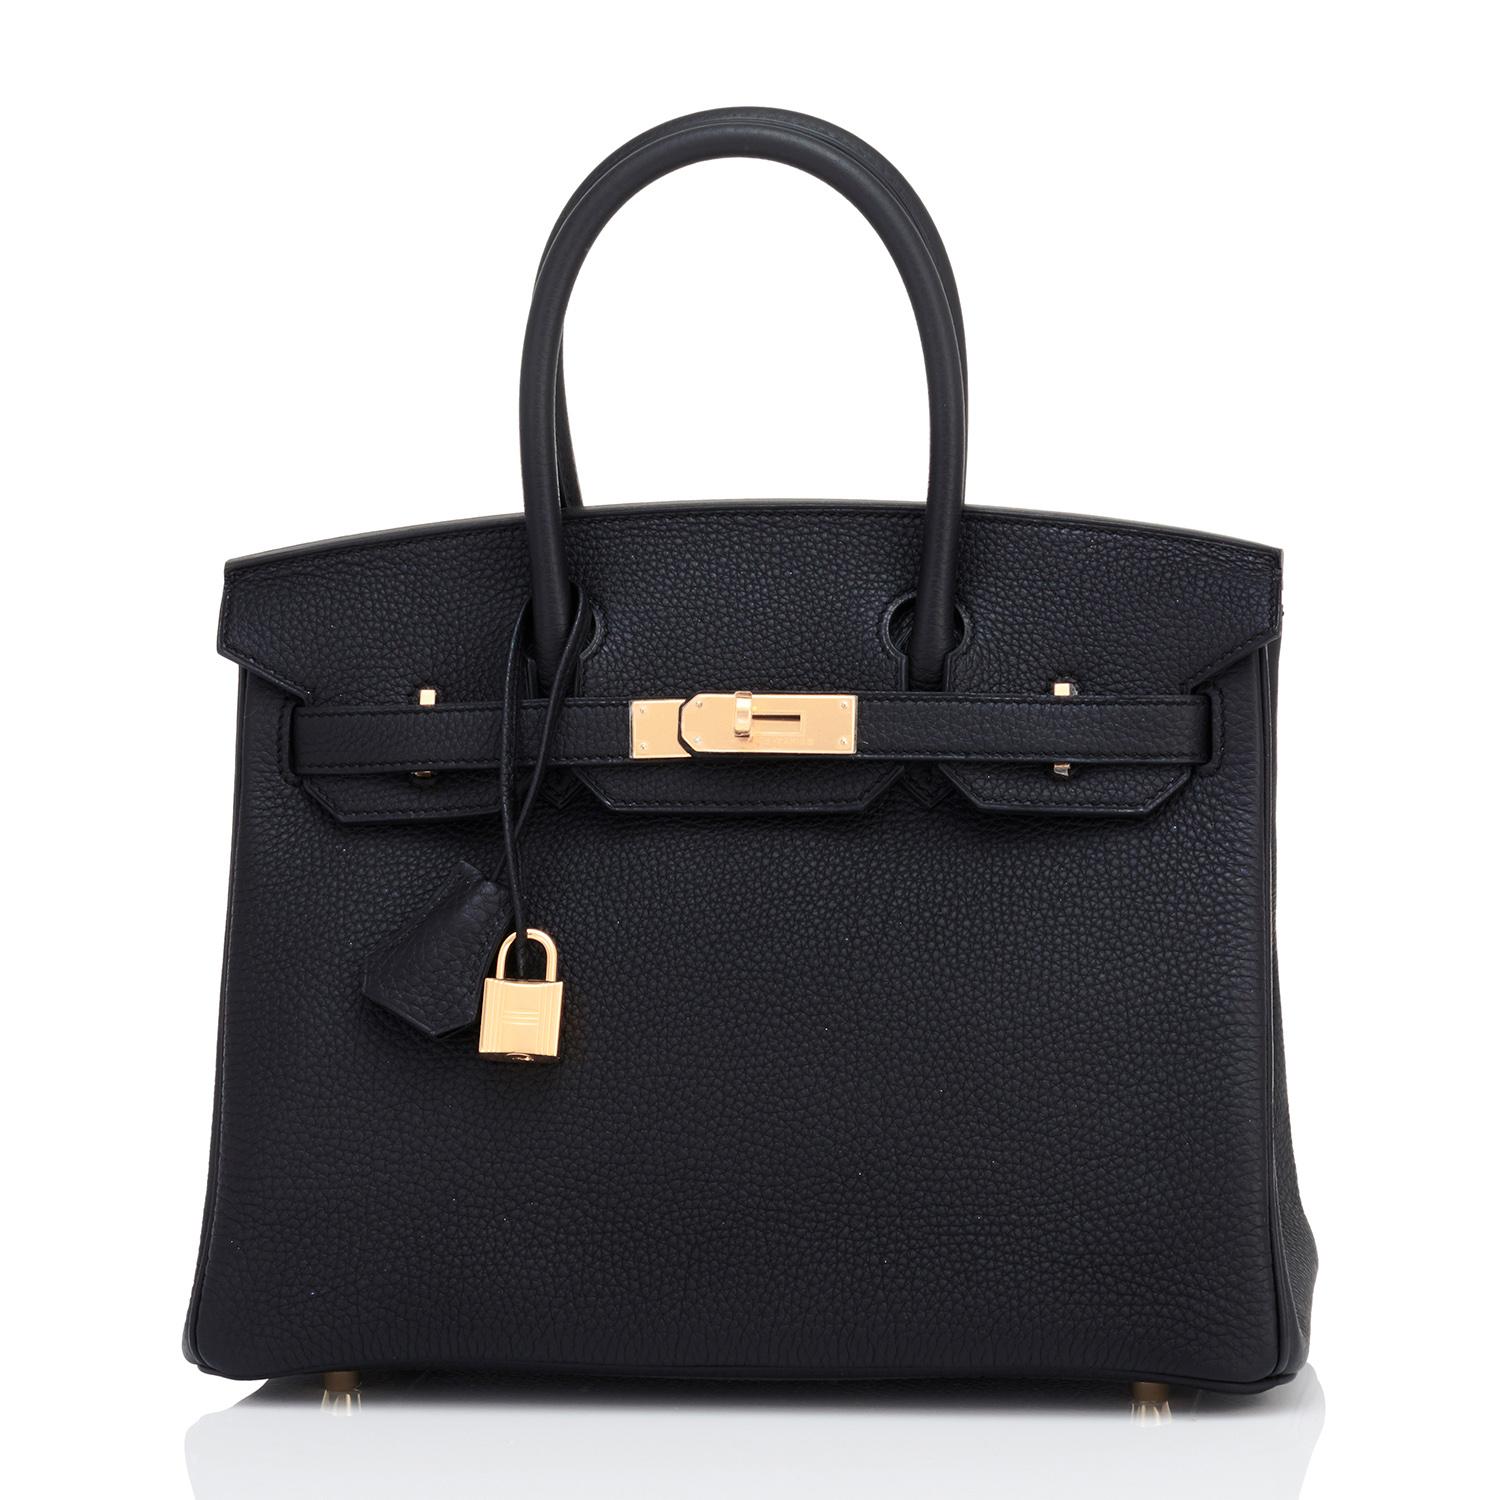 Hermes Black Togo 30cm Birkin Rose Gold Hardware Bag D Stamp
Brand New in Box. Store Fresh. Pristine Condition (with plastic on hardware)
Just purchased from store; bag bears new 2019 interior D stamp! 
Perfect gift! Comes with lock, keys,